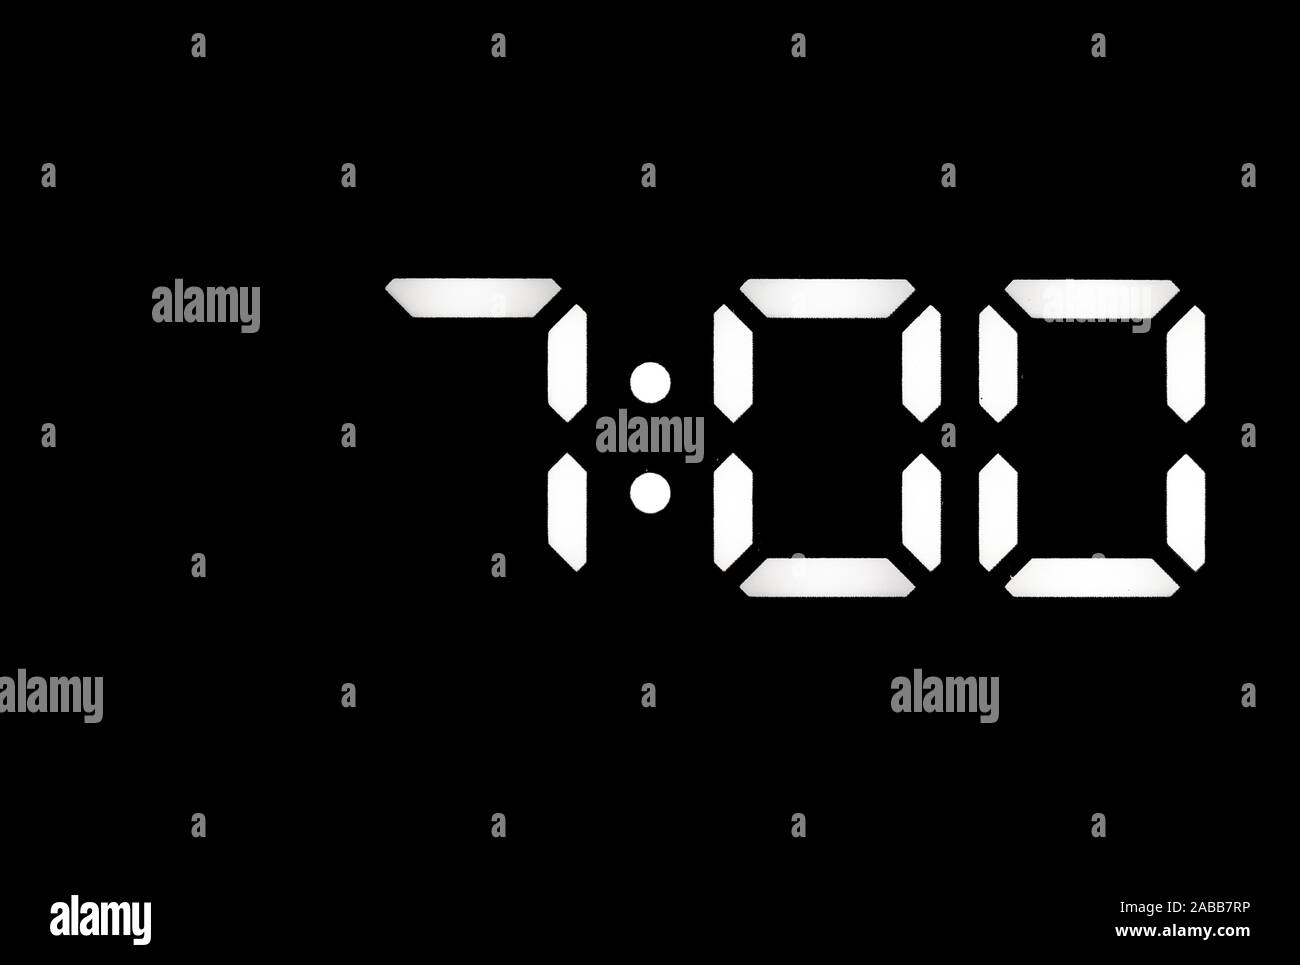 Real white led digital clock on a black background showing time 7:00 Stock Photo